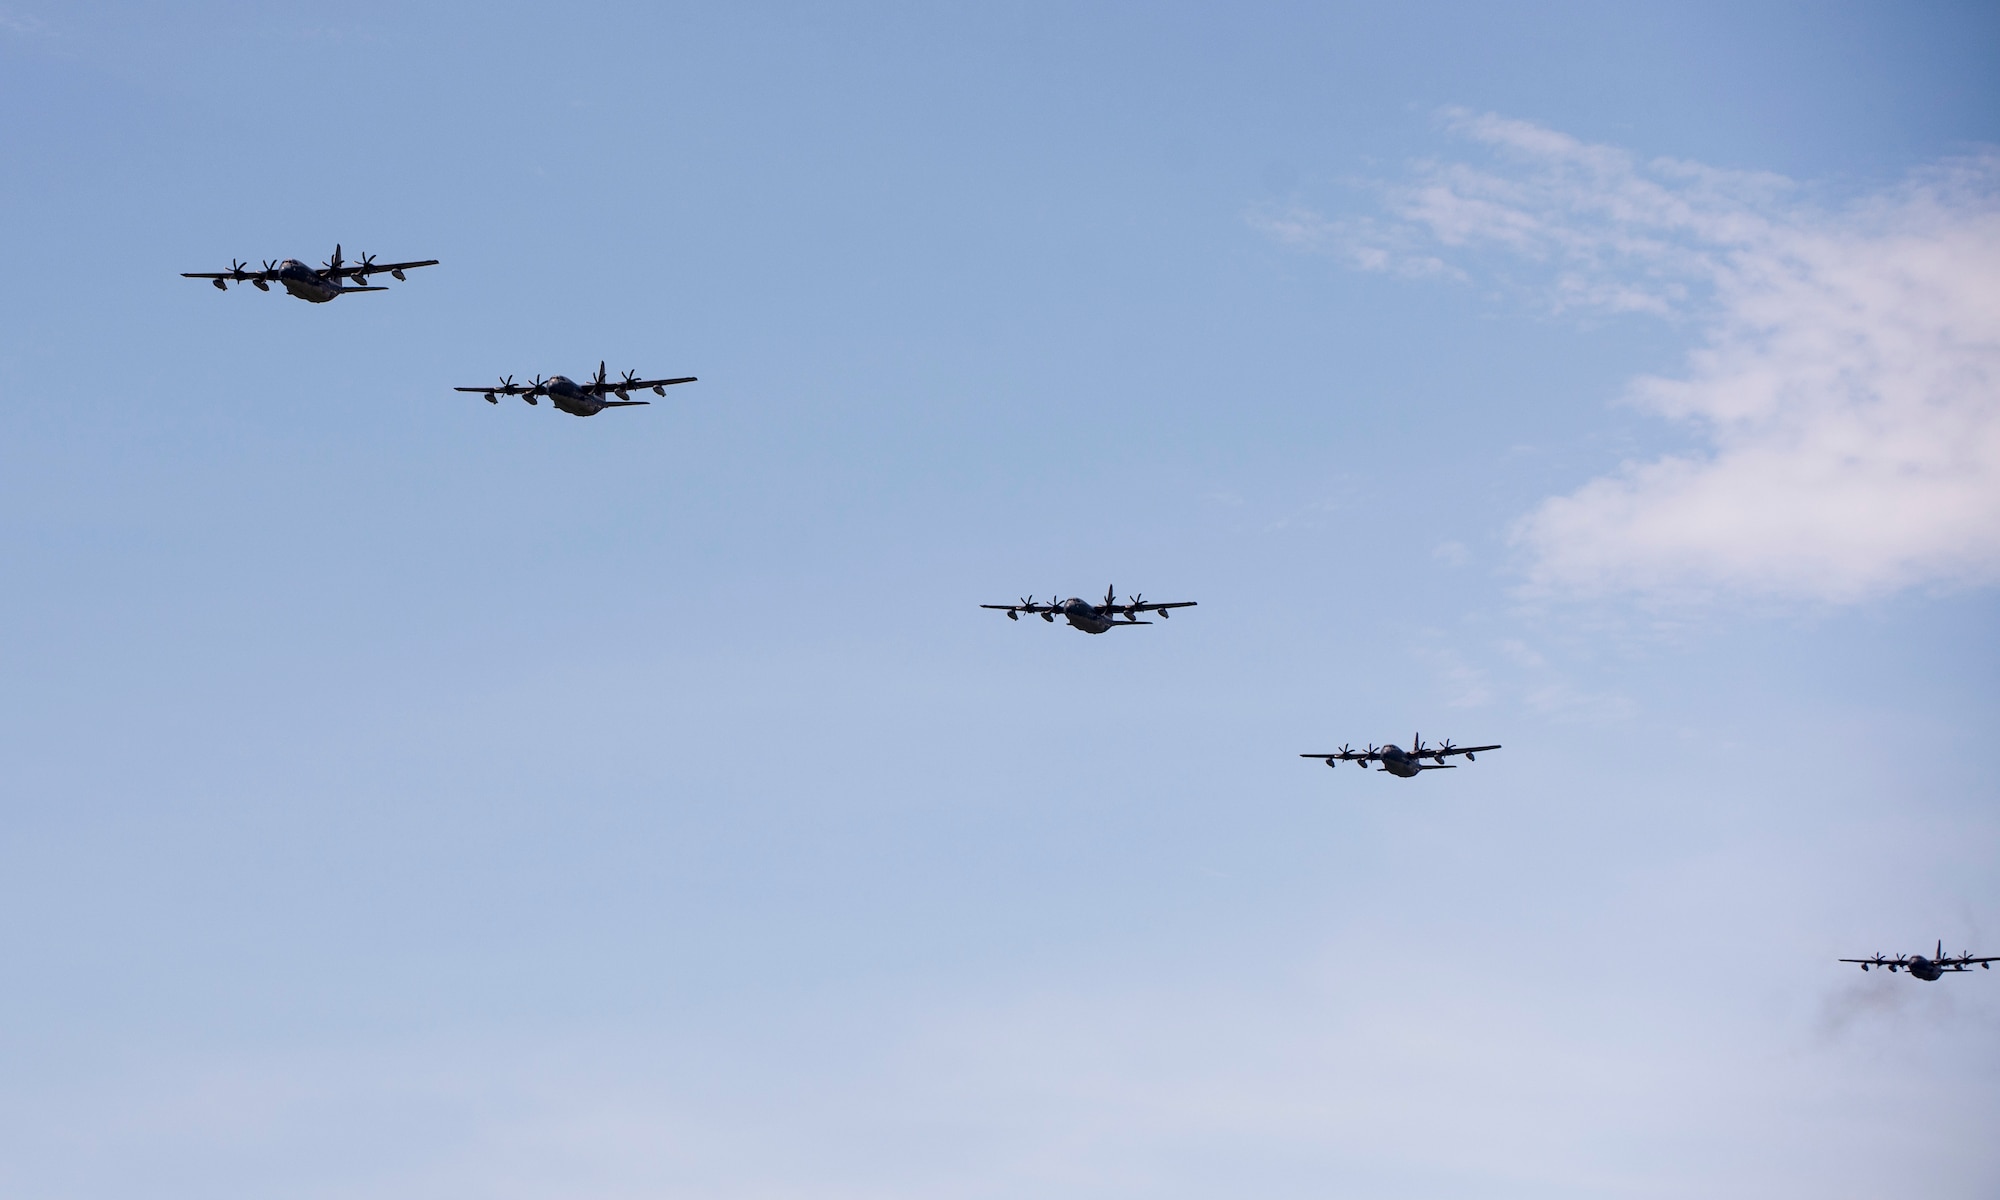 U.S. Air Force MC-130J Commando IIs from the 17th Special Operations Squadron return to base in a five-aircraft formation during a mass launch training mission June 22, 2017 at Kadena Air Base, Japan. Routine flights and airdrops are conducted to maintain proficiency and training certifications for prospective missions. (U.S. Air Force photo by Senior Airman Omari Bernard)